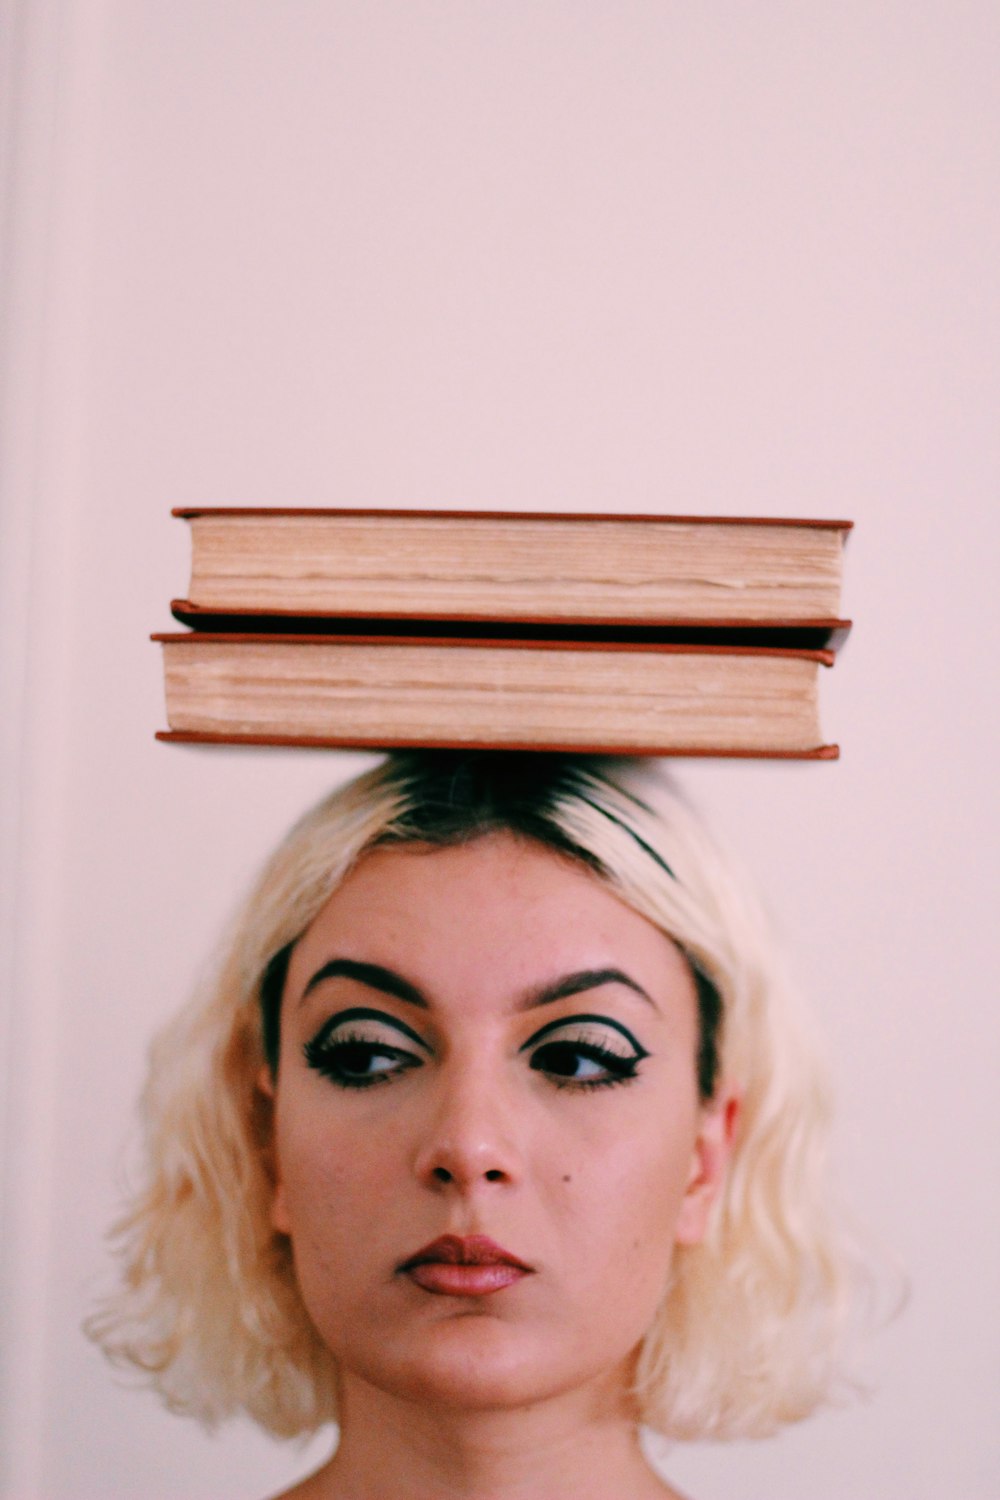 two books on top of woman's head